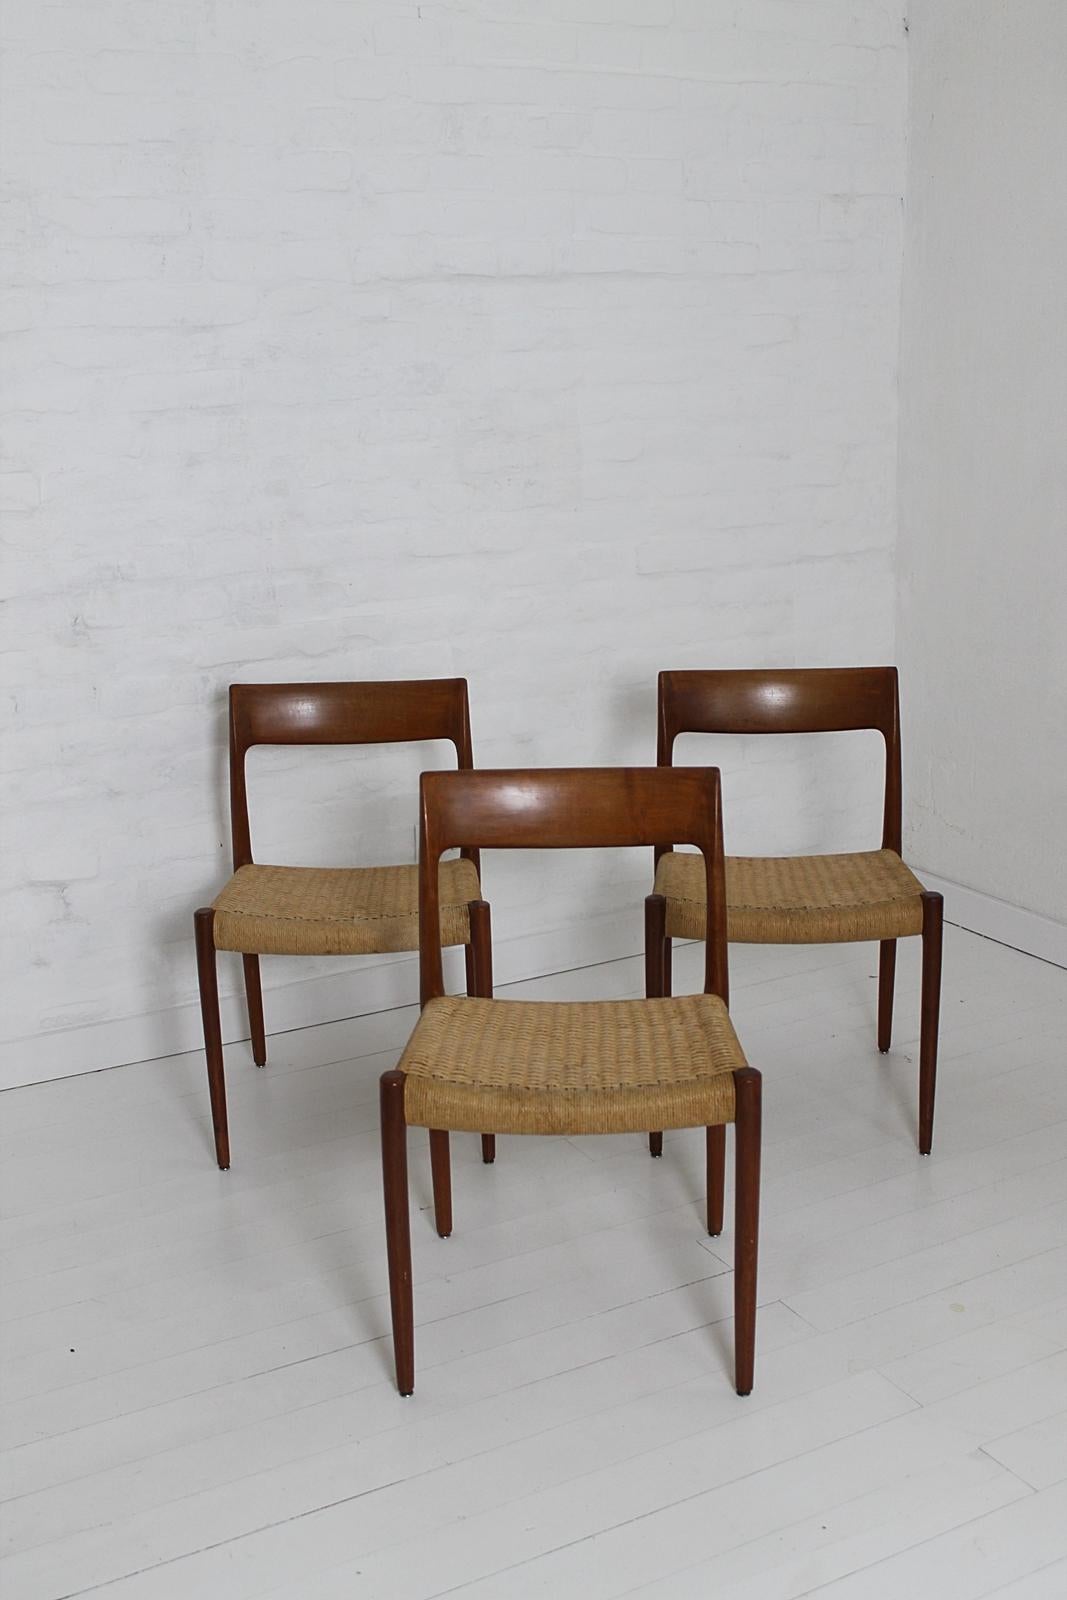 This beautiful set of vintage dining chairs designed by Niels O. Møller was manufactured by J. l. Møller in Denmark. The set features 3 chairs of massive teak wood and paper cord seats,
model 77, a Classic side chair model.
The chairs are in good